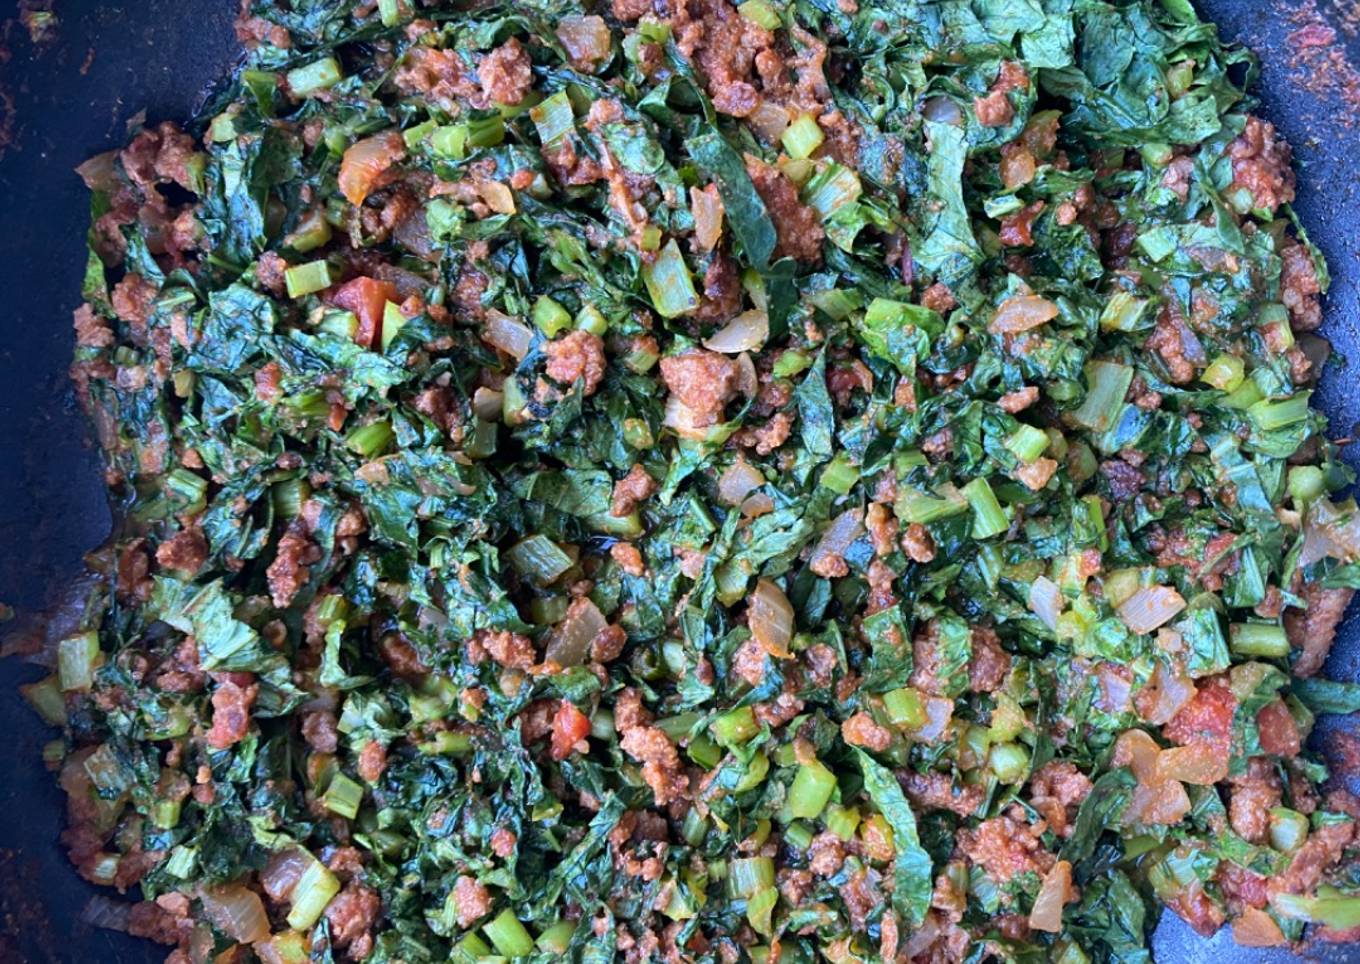 My minced beef and kale relish